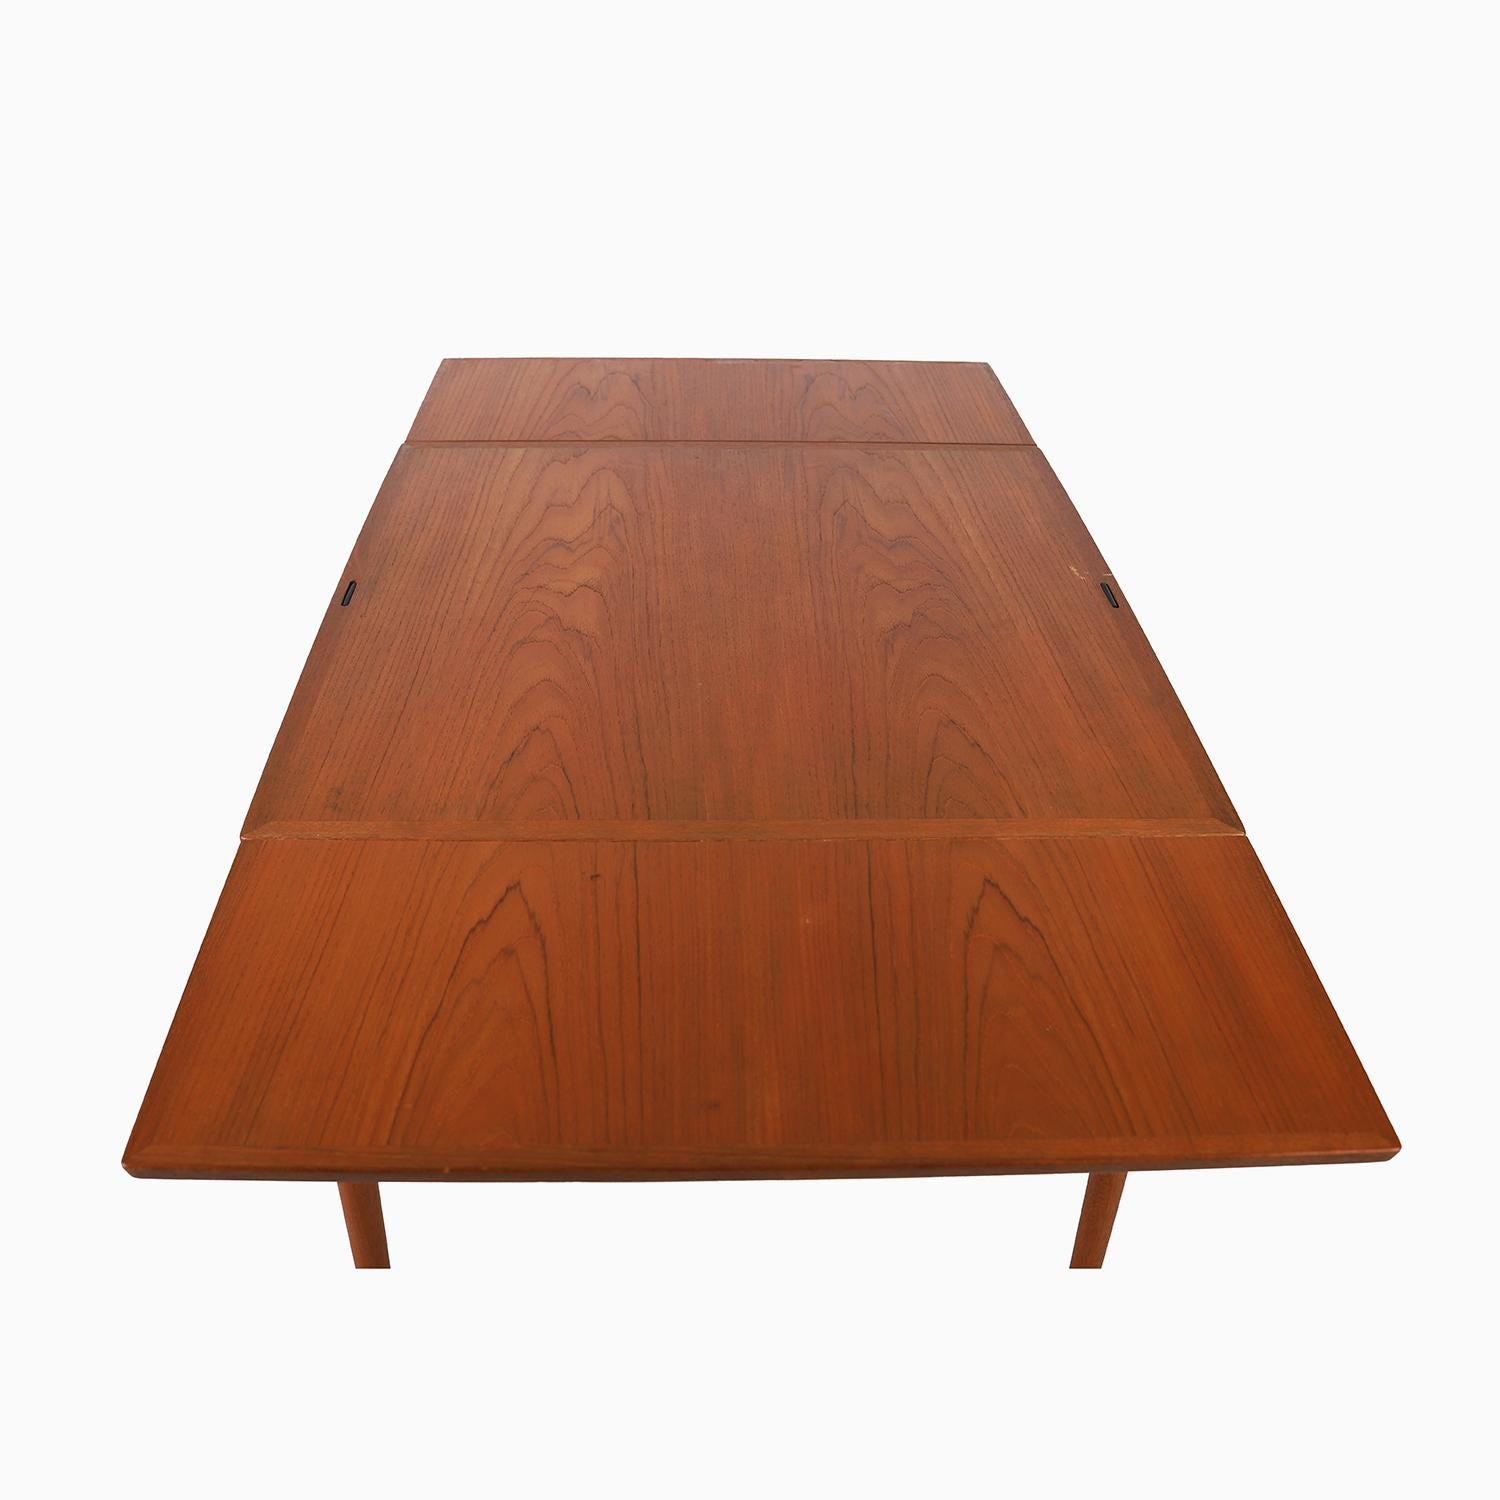 20th Century Danish Modern Teak Game table by Poul Hundevad For Sale